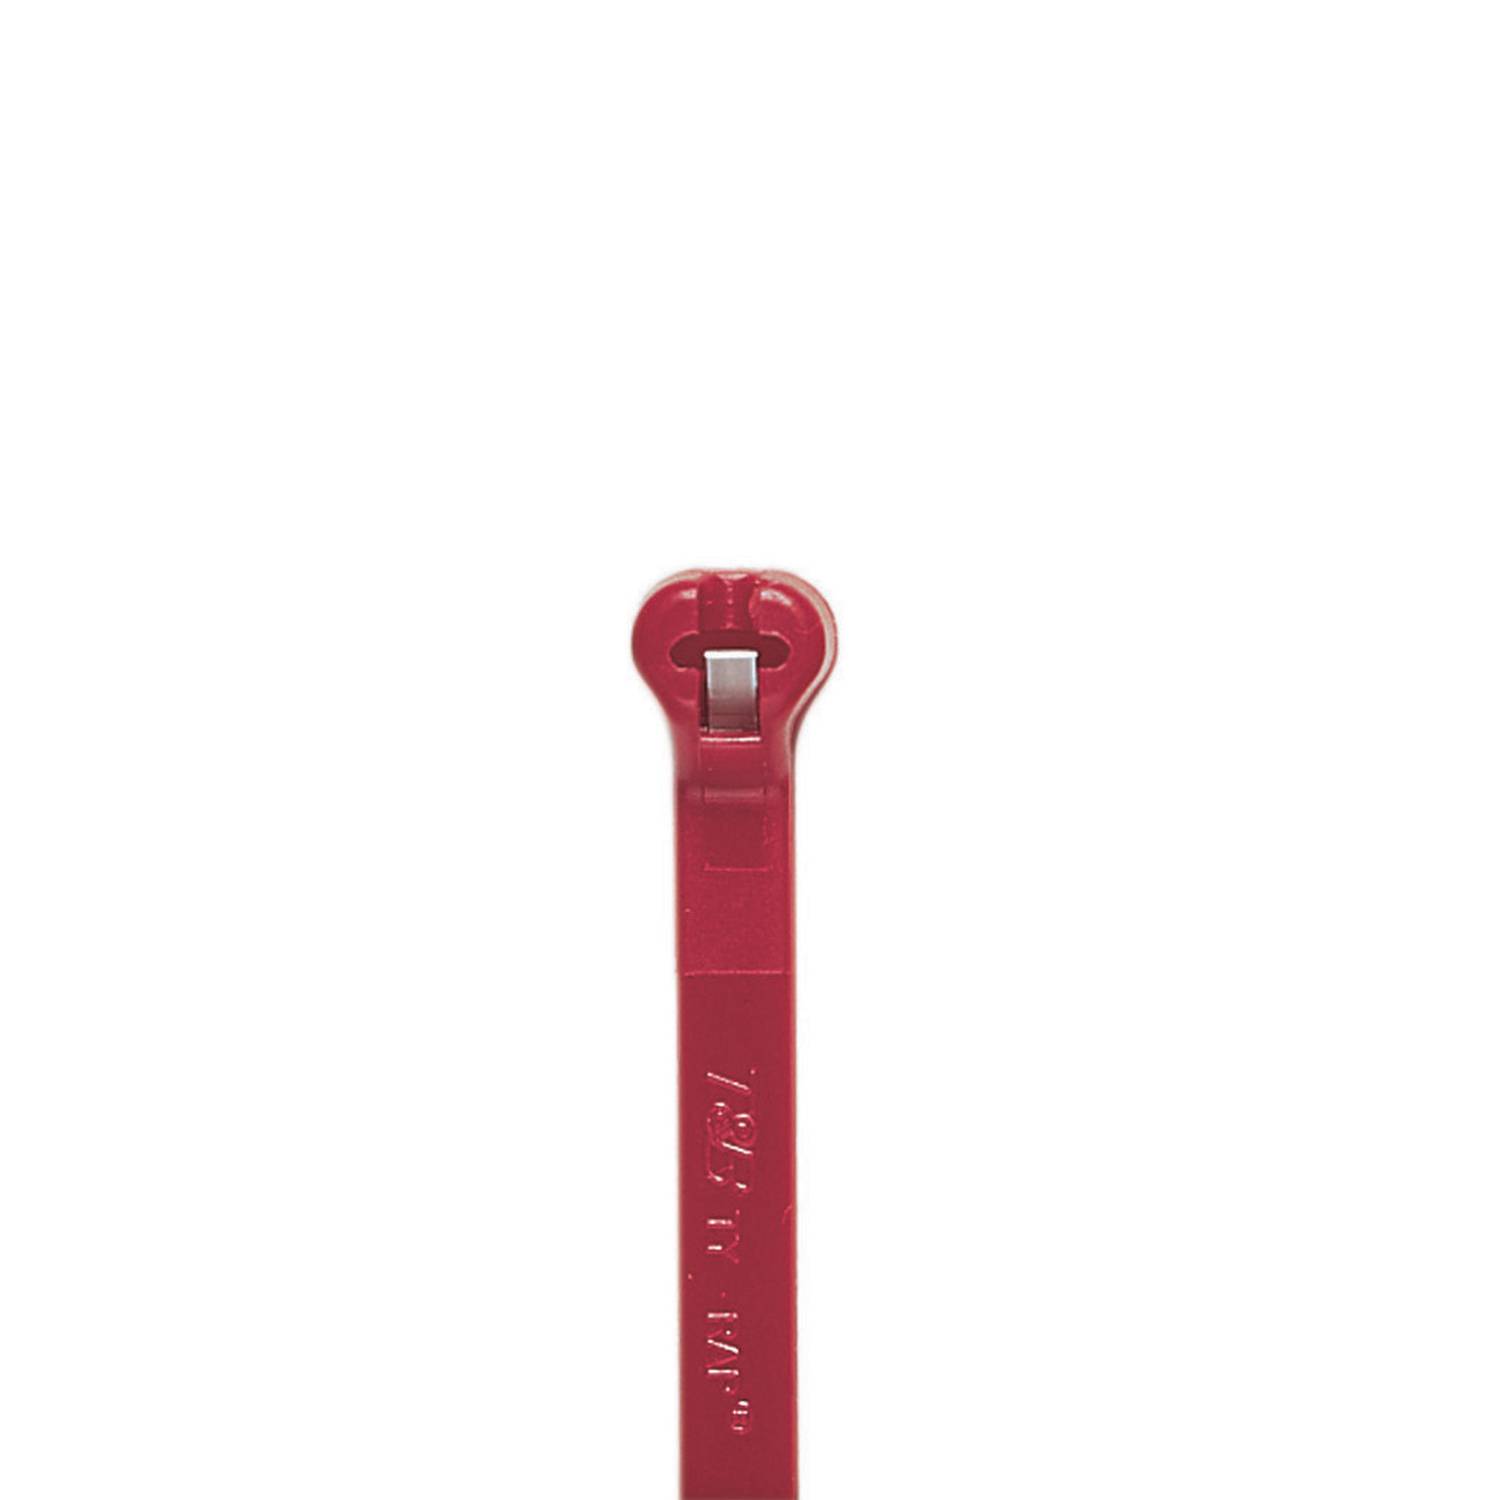 Ty-Rap® TY23M-2 2-Piece High Performance Standard Cable Tie, 3.62 in L x 0.09 in W x 0.03 in THK, Nylon/Polyamide 6.6, Red